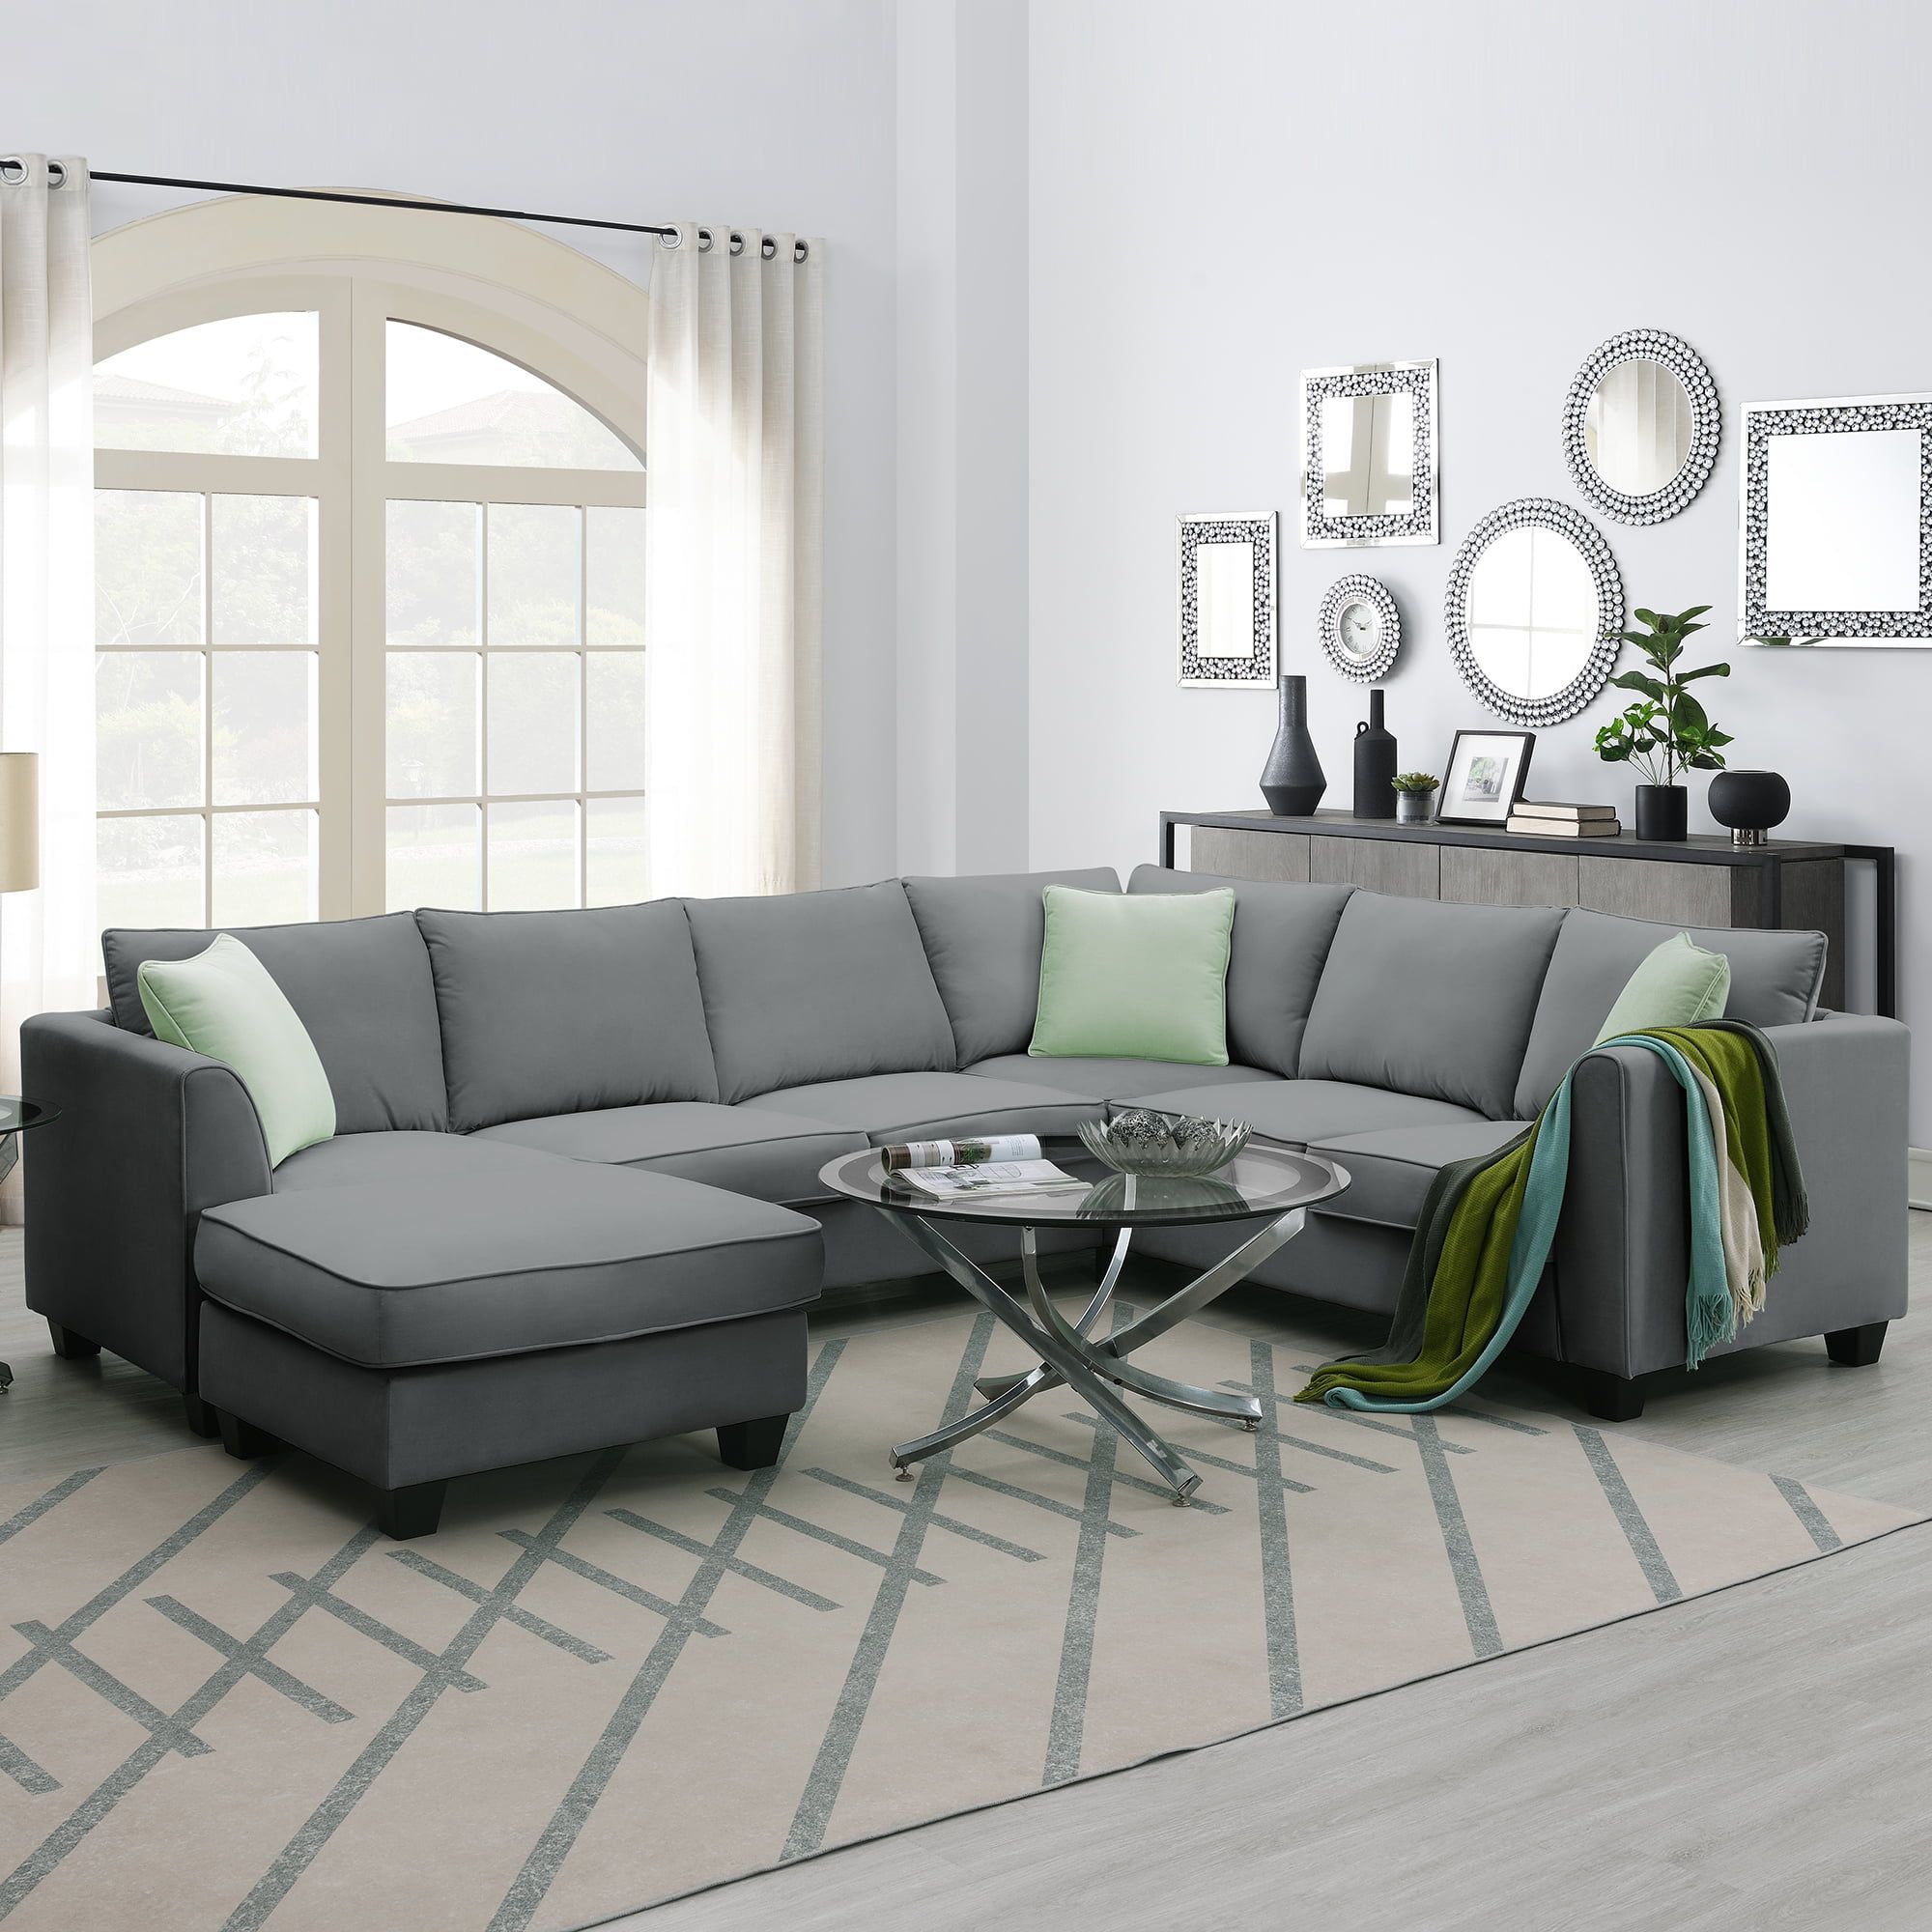 L Shaped Modular Sectional Couch, Kamida 7 Seater Sectional Couch With  Ottoman And 3 Pillows, Modern L Shaped Fabric Upholstered Couch Furniture,  Heavy Duty Sectional Couch For Living Room, Gray – Walmart Throughout 7 Seater Sectional Couch With Ottoman And 3 Pillows (View 2 of 15)